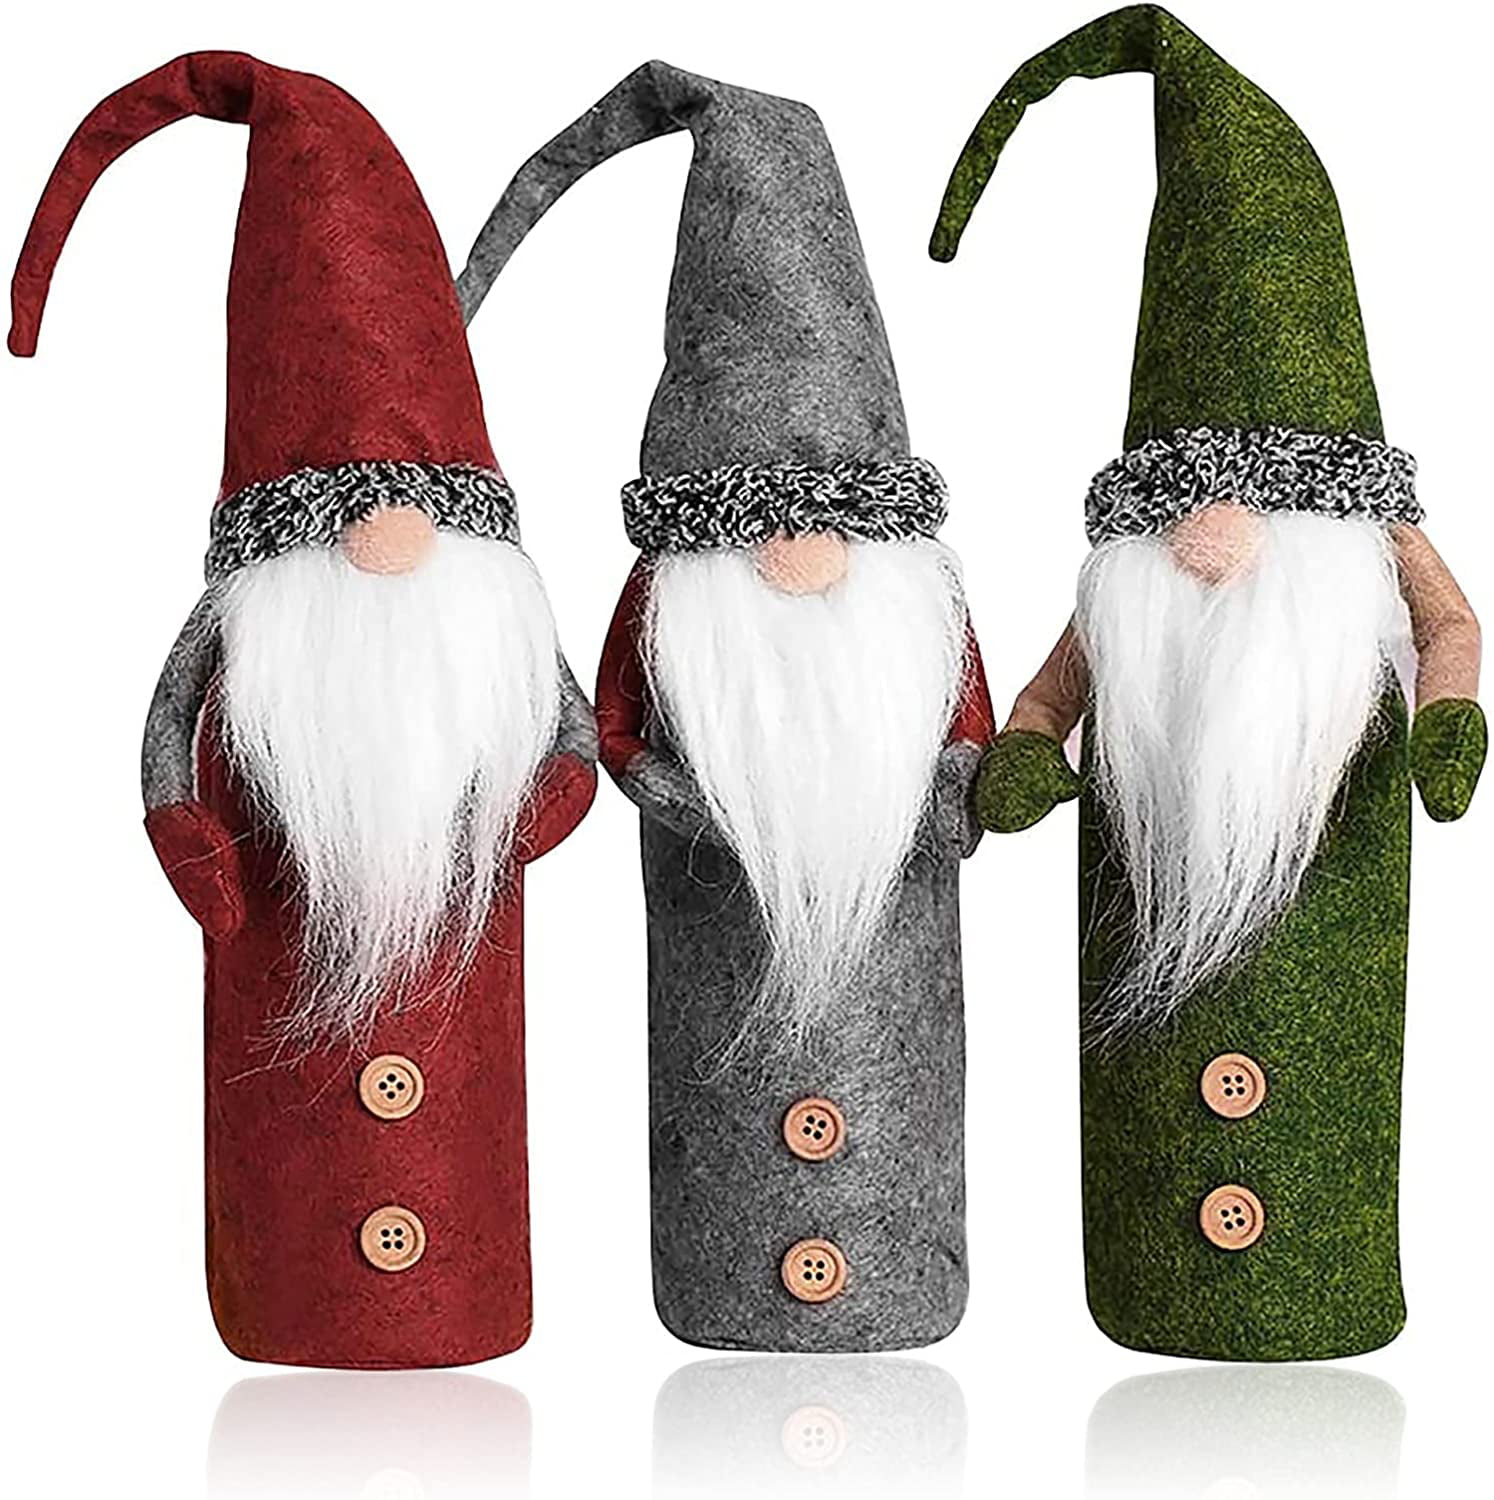 3 Pieces Christmas Gnomes Wine Bottle Cover Number-one Handmade Swedish Tomte Gnomes Wine Bottle Toppers Santa Claus Bottle Bags with Drawstring Style for Holiday Home Table Christmas Decorations 